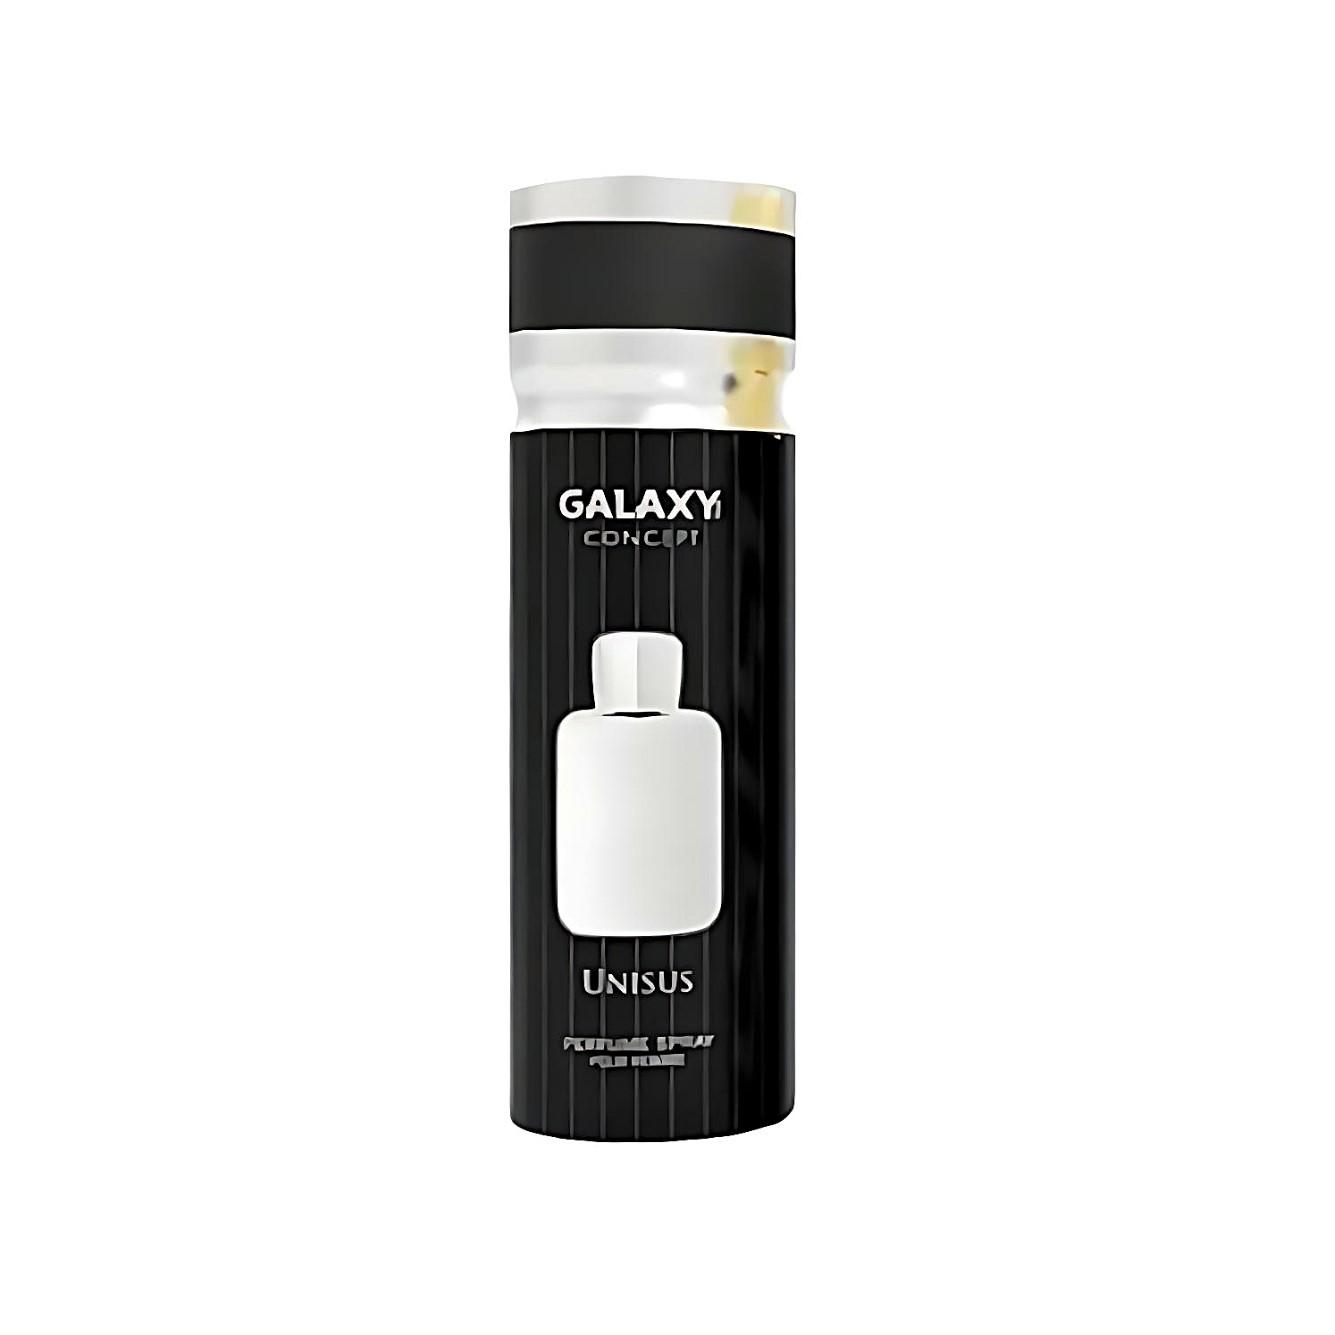 Galaxy Concept Unisus 200Ml Perfume Spray Pour Homme (Inspired By Perfume De Marly - Pegasus)